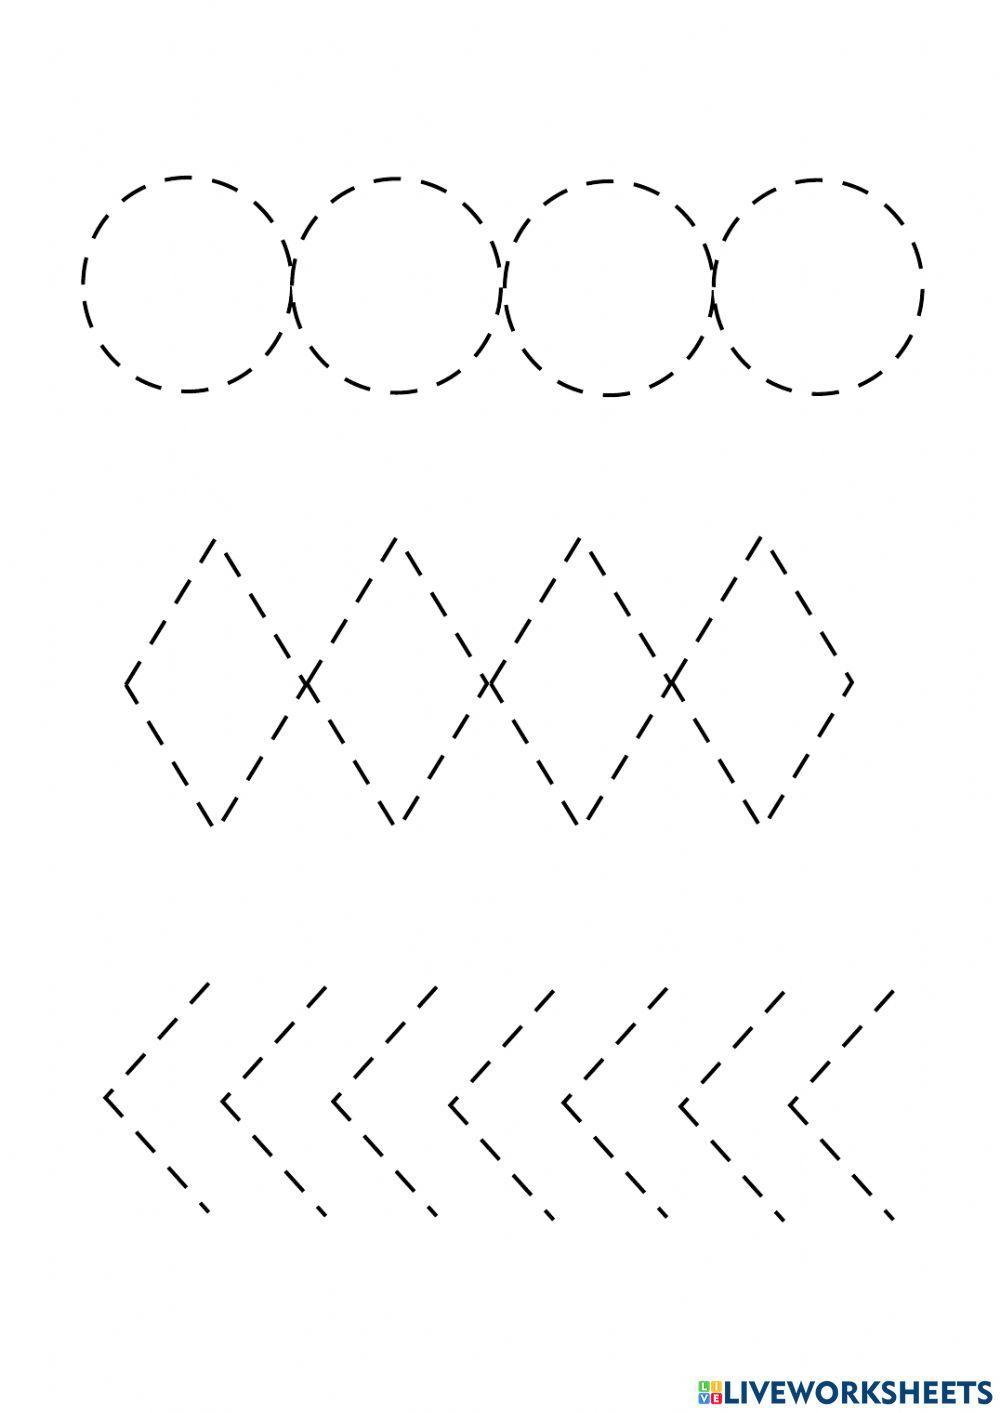 Pattern Tracing